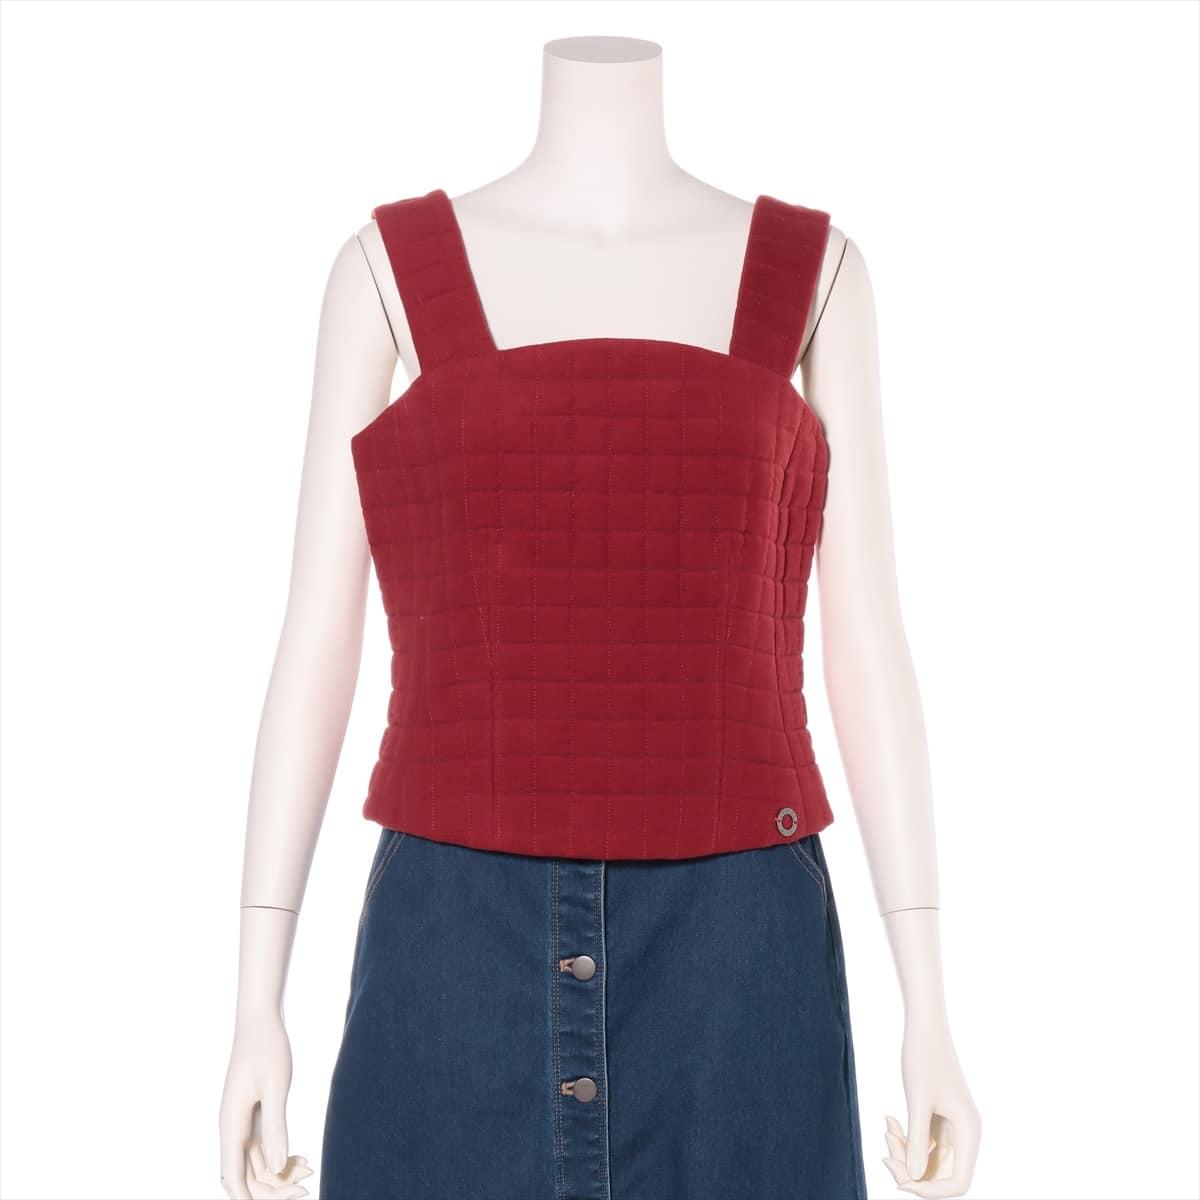 Chanel 00T Cotton & Polyester Bustier 42 Ladies' Red  There is some stickiness on the zip